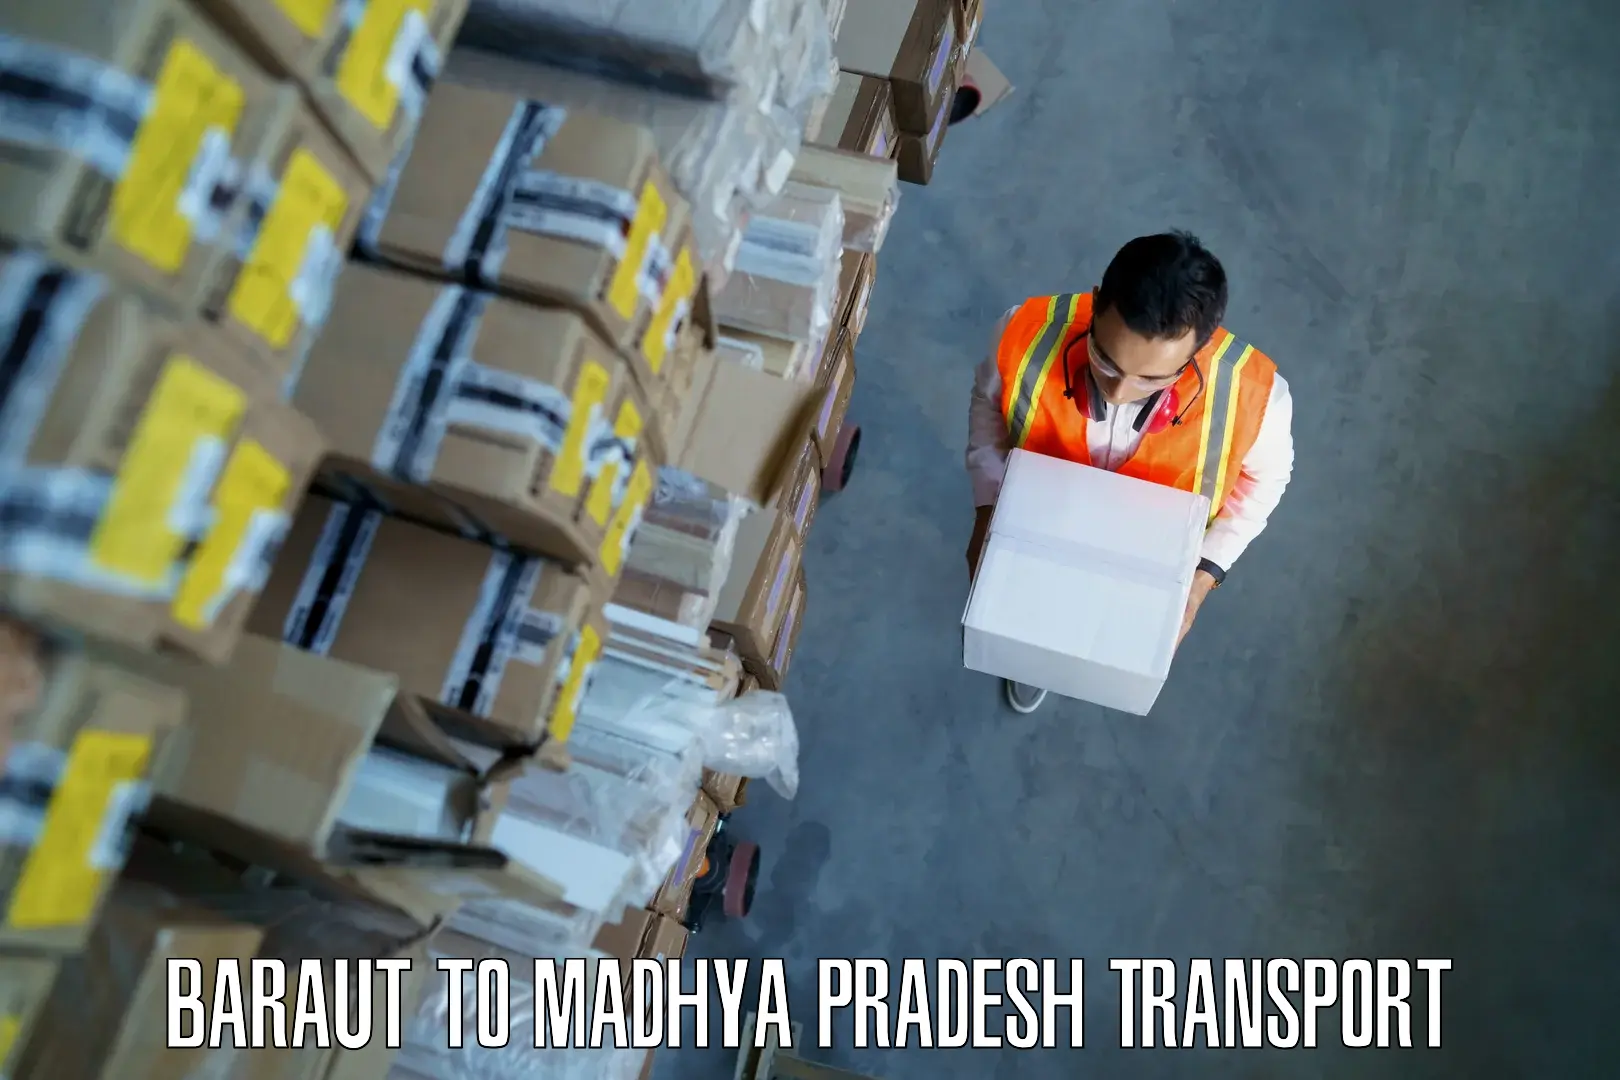 Truck transport companies in India Baraut to Bhind